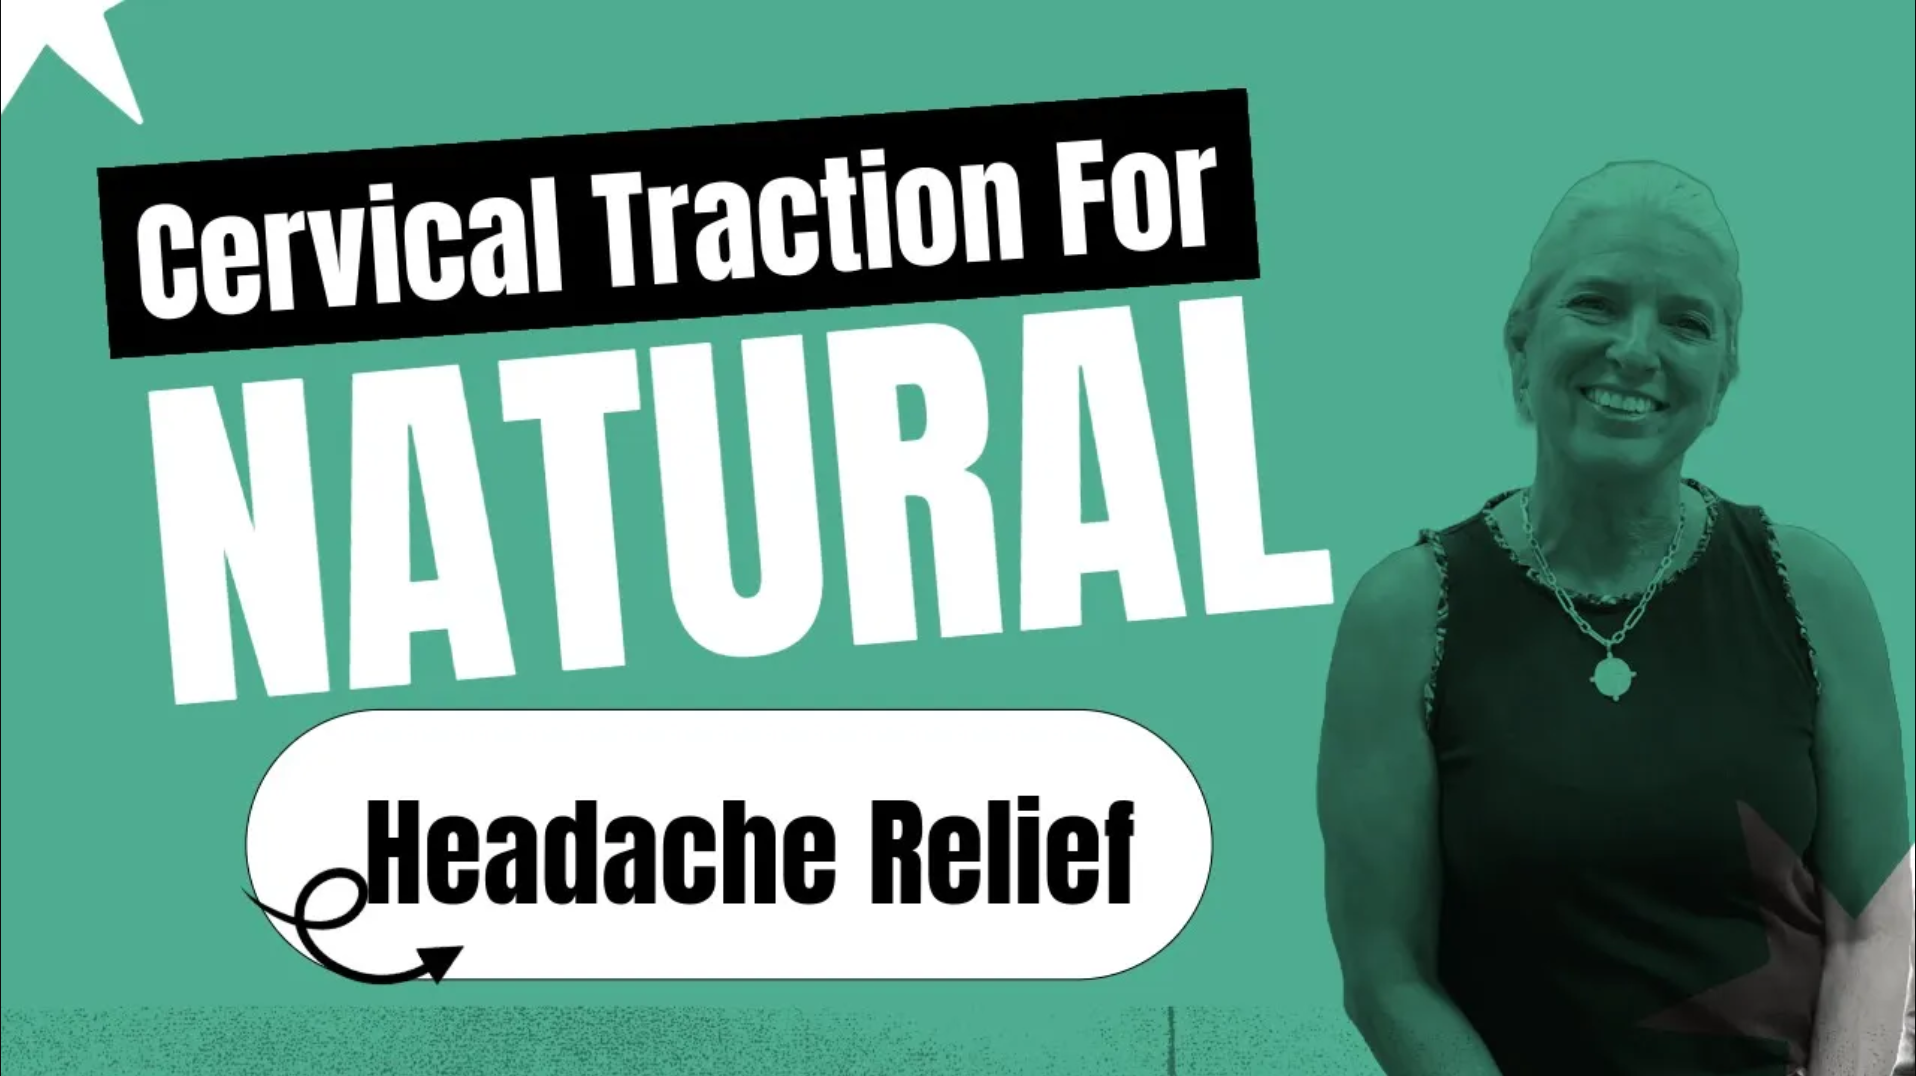 Cervical Traction for Natural Headache Relief | Chiropractor for Headaches in Belmar, NJ